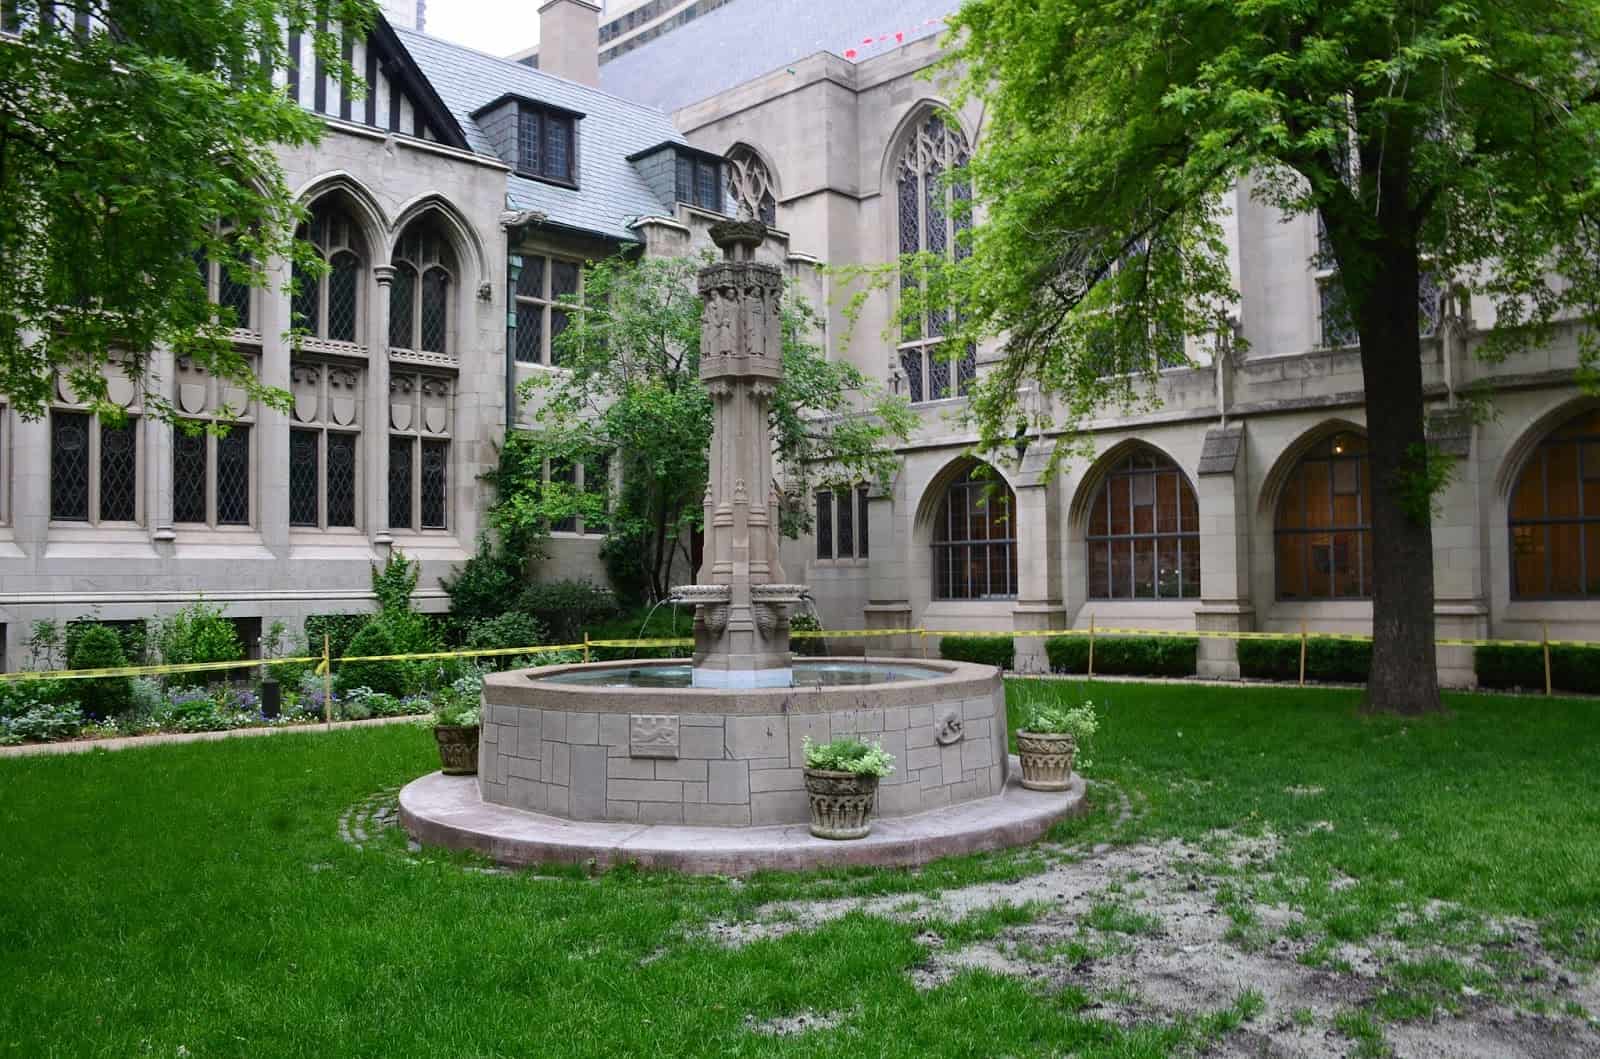 Cloister of the Fourth Presbyterian Church on the Magnificent Mile in Chicago